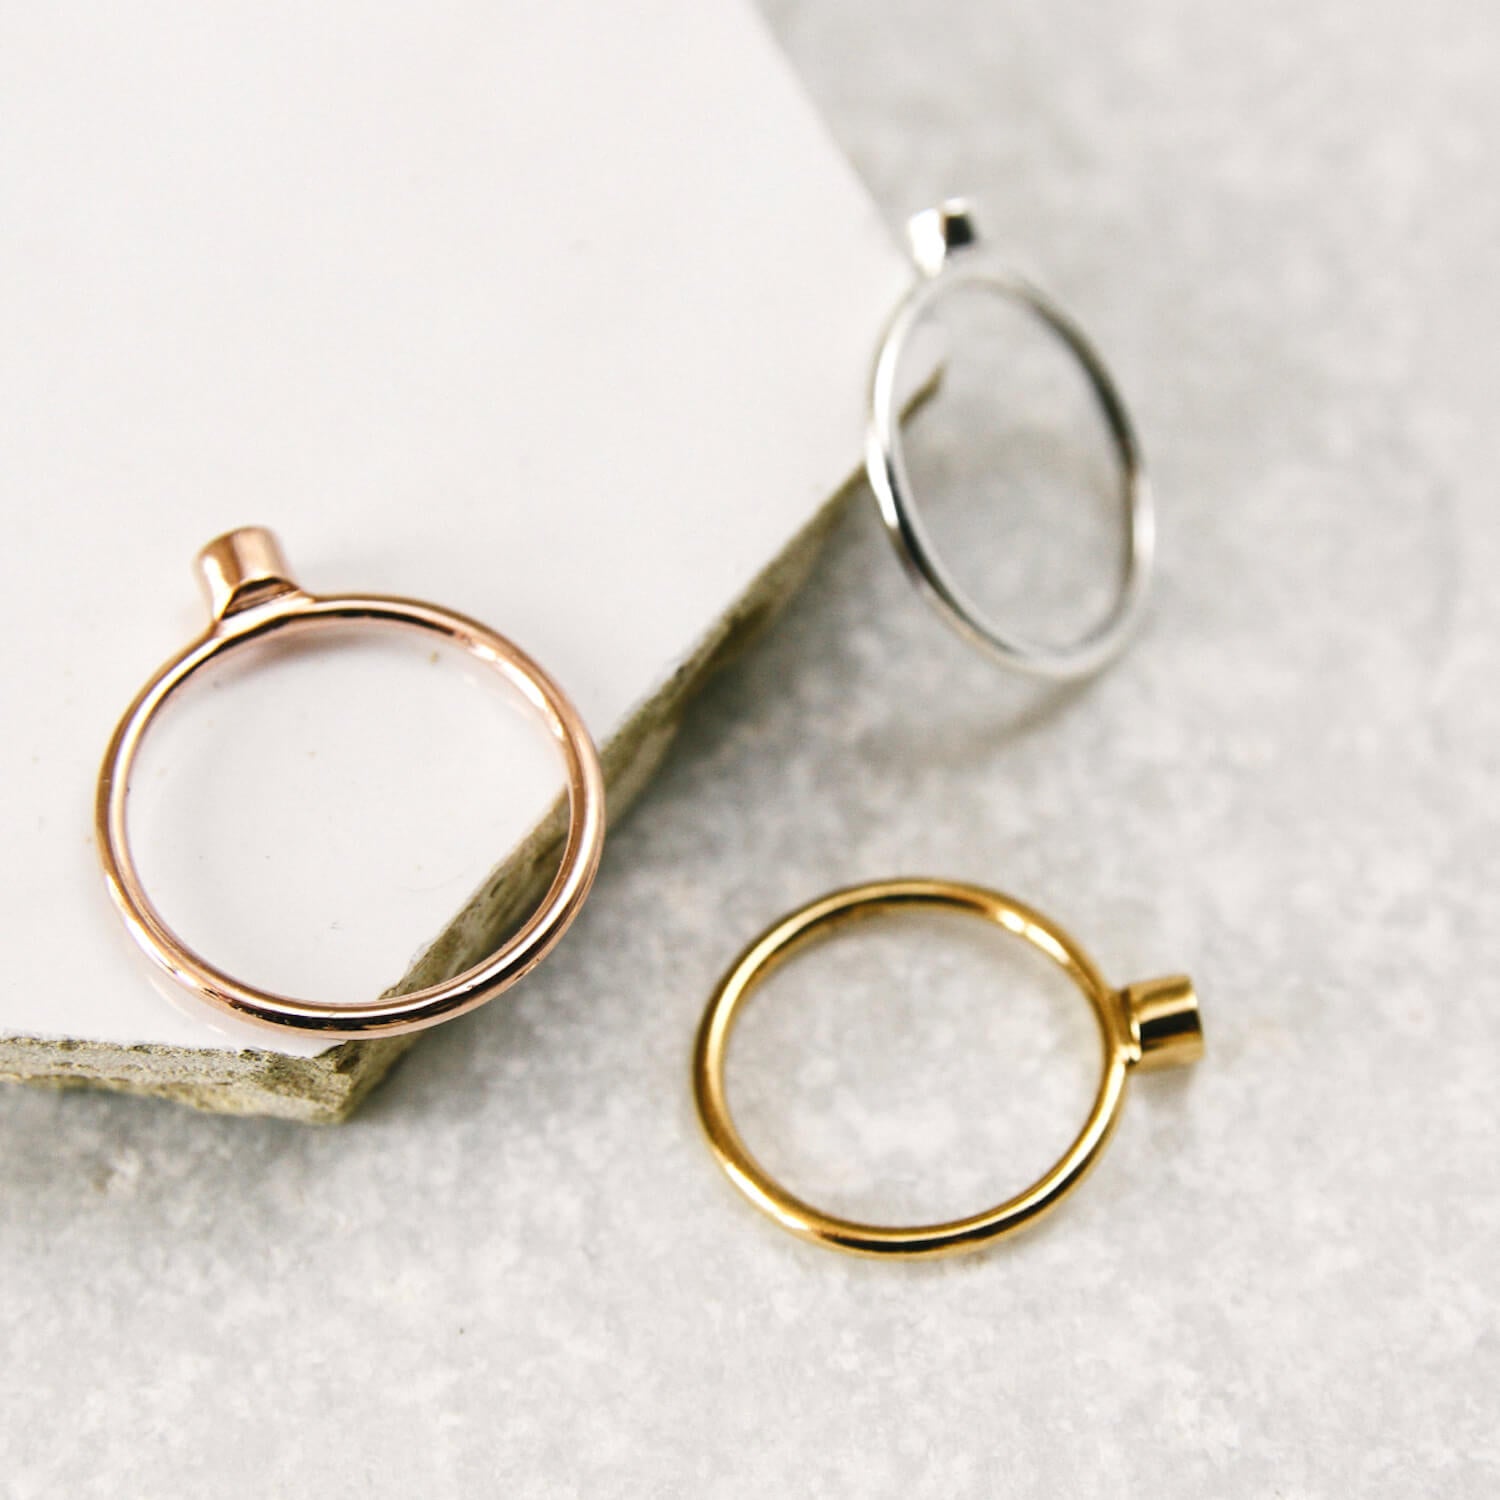 Three rose gold, silver and gold Matthew Calvin simple dot rings photographed on a hexagonal tile 